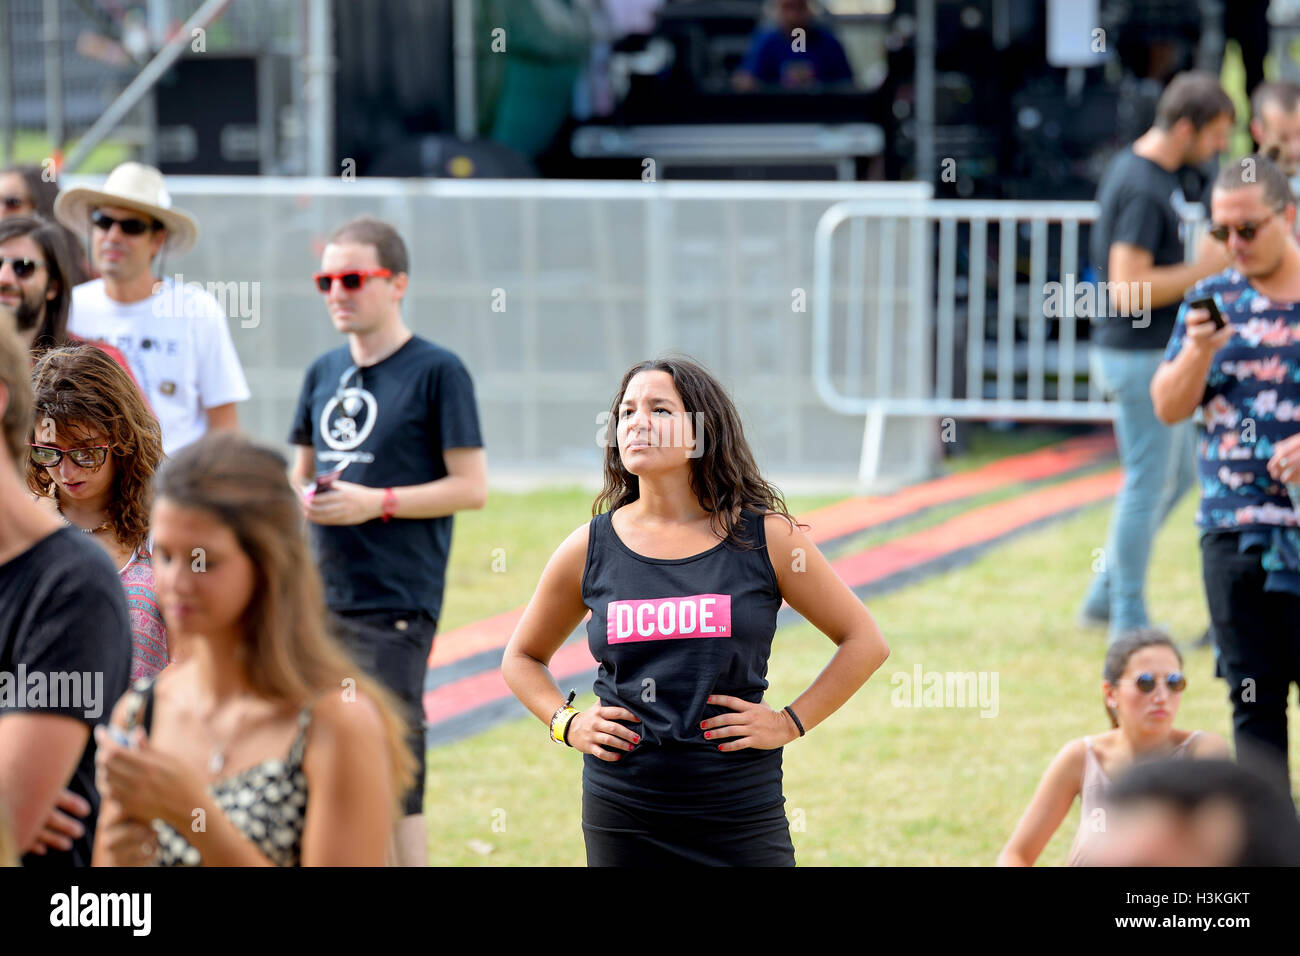 MADRID - SEP 13: People in an outdoors concert at Dcode Festival on September 13, 2014 in Madrid, Spain. Stock Photo